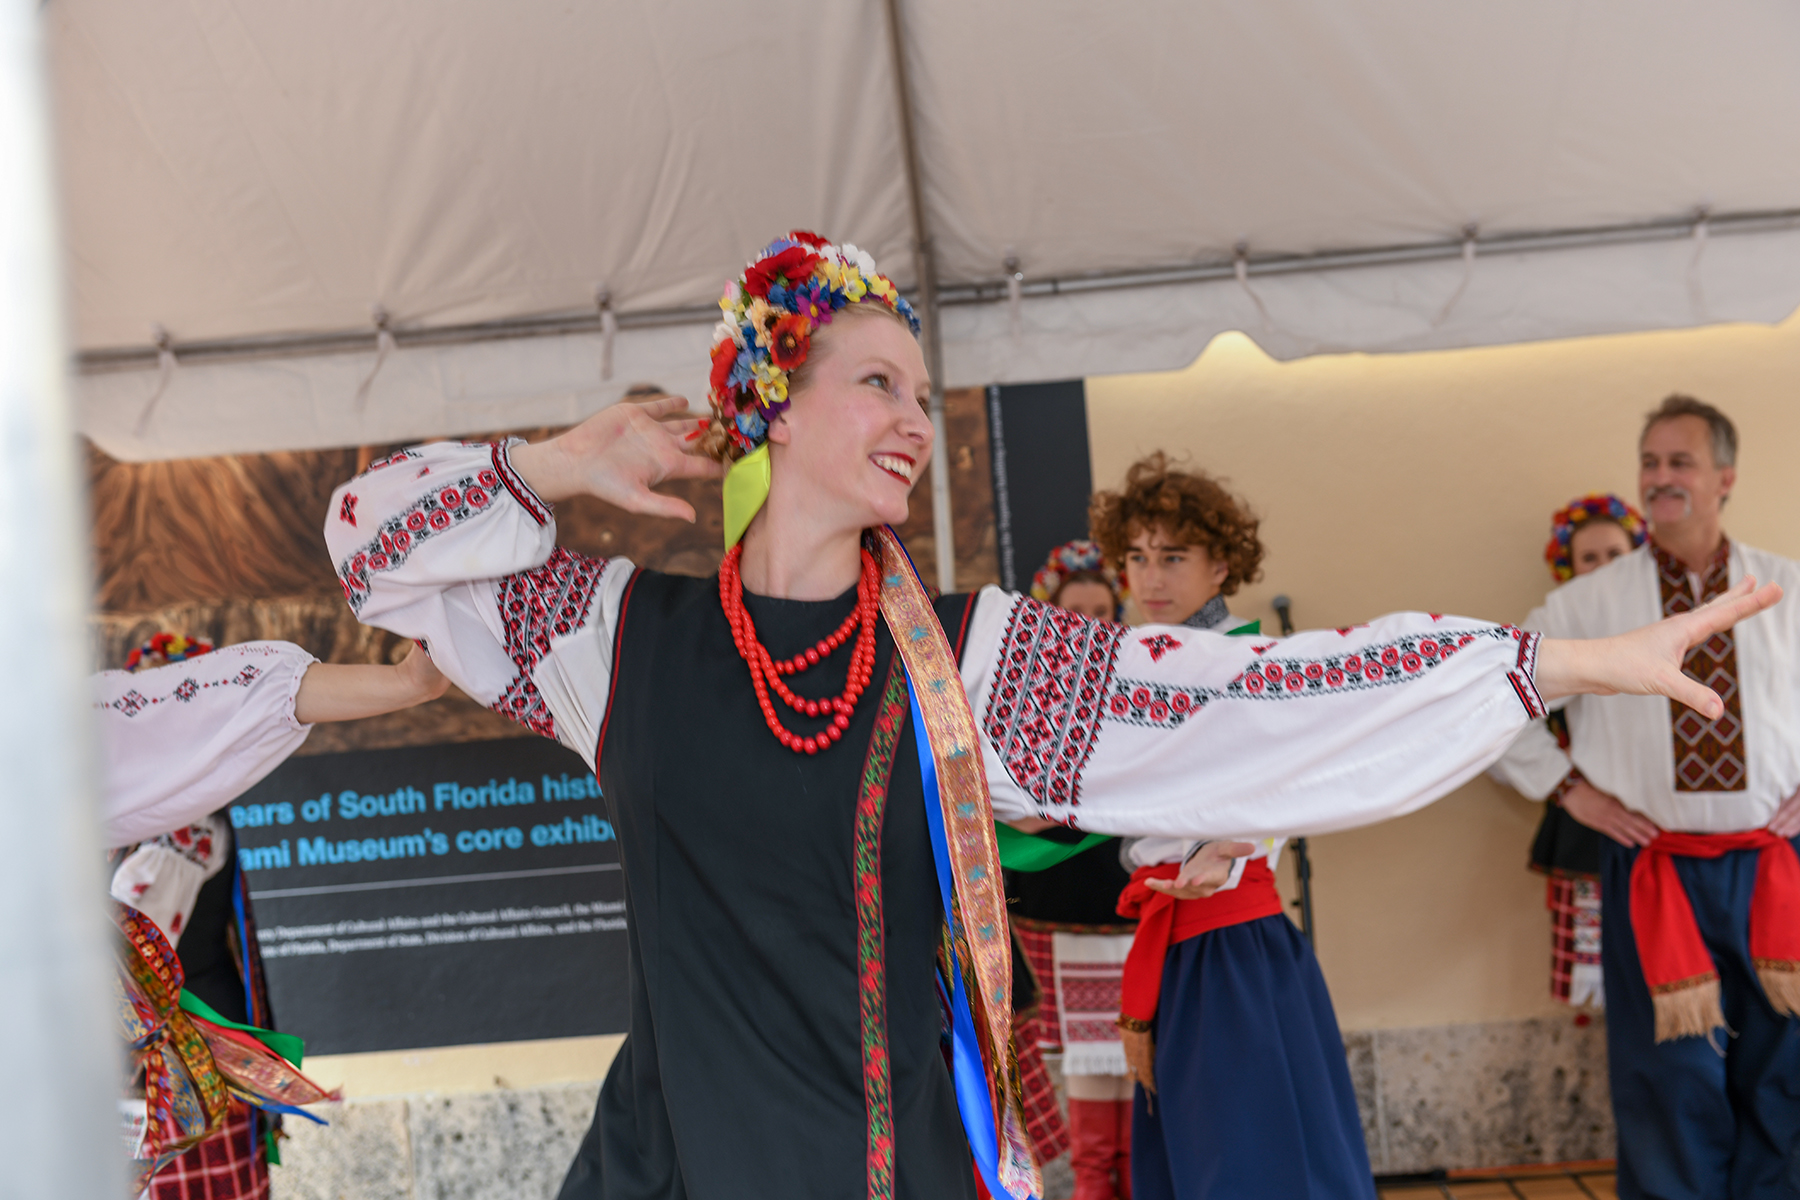 woman dances in traditional costume of flower headband and embroidered dress